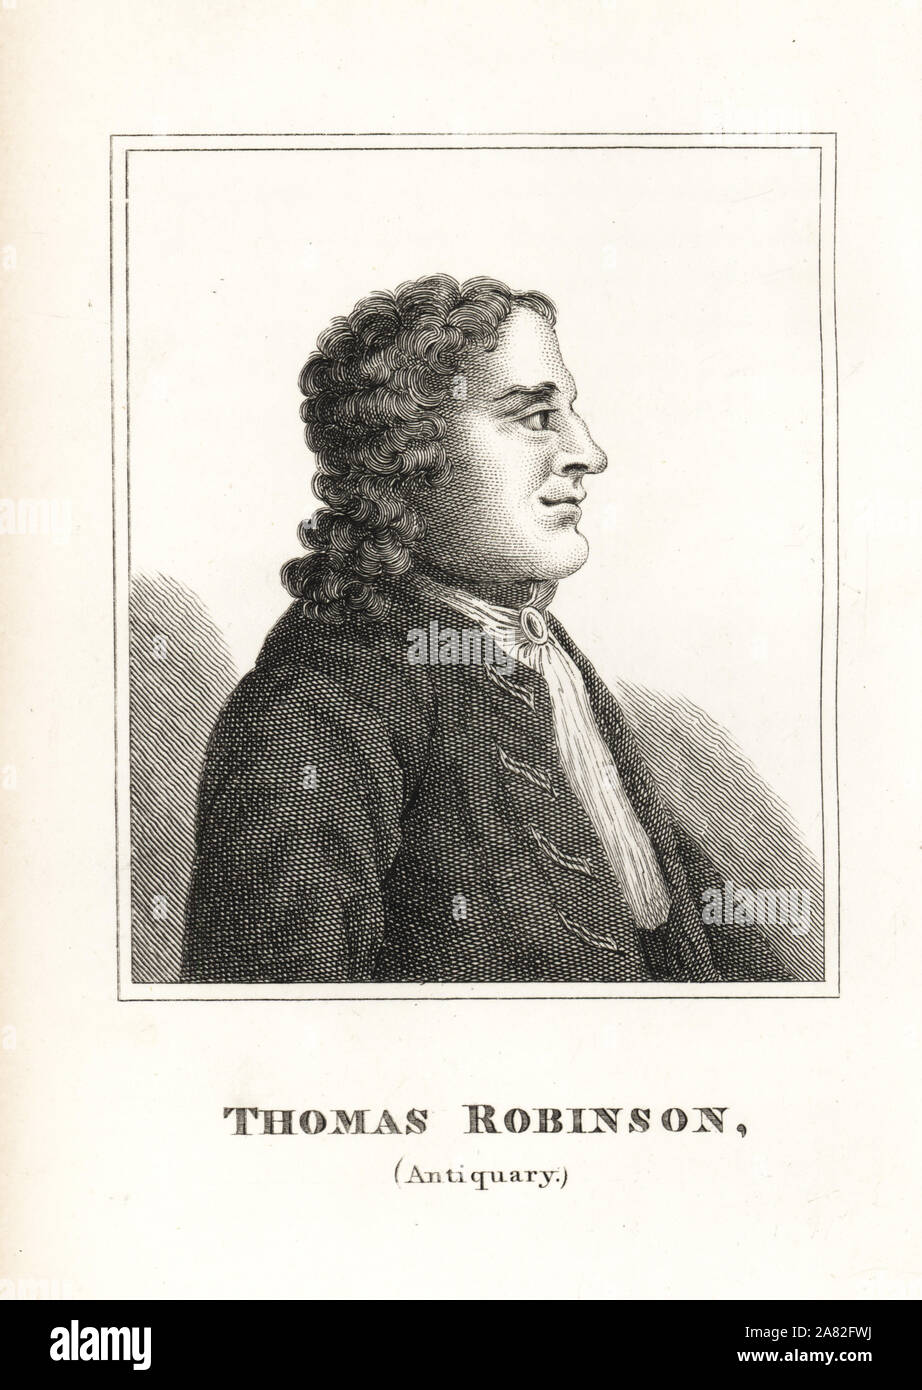 Thomas Robinson, antiquary notorious for destroying antiquities, 18th century. Engraving by R. Grave from James Caulfield's Portraits, Memoirs and Characters of Remarkable Persons, London, 1819. Stock Photo